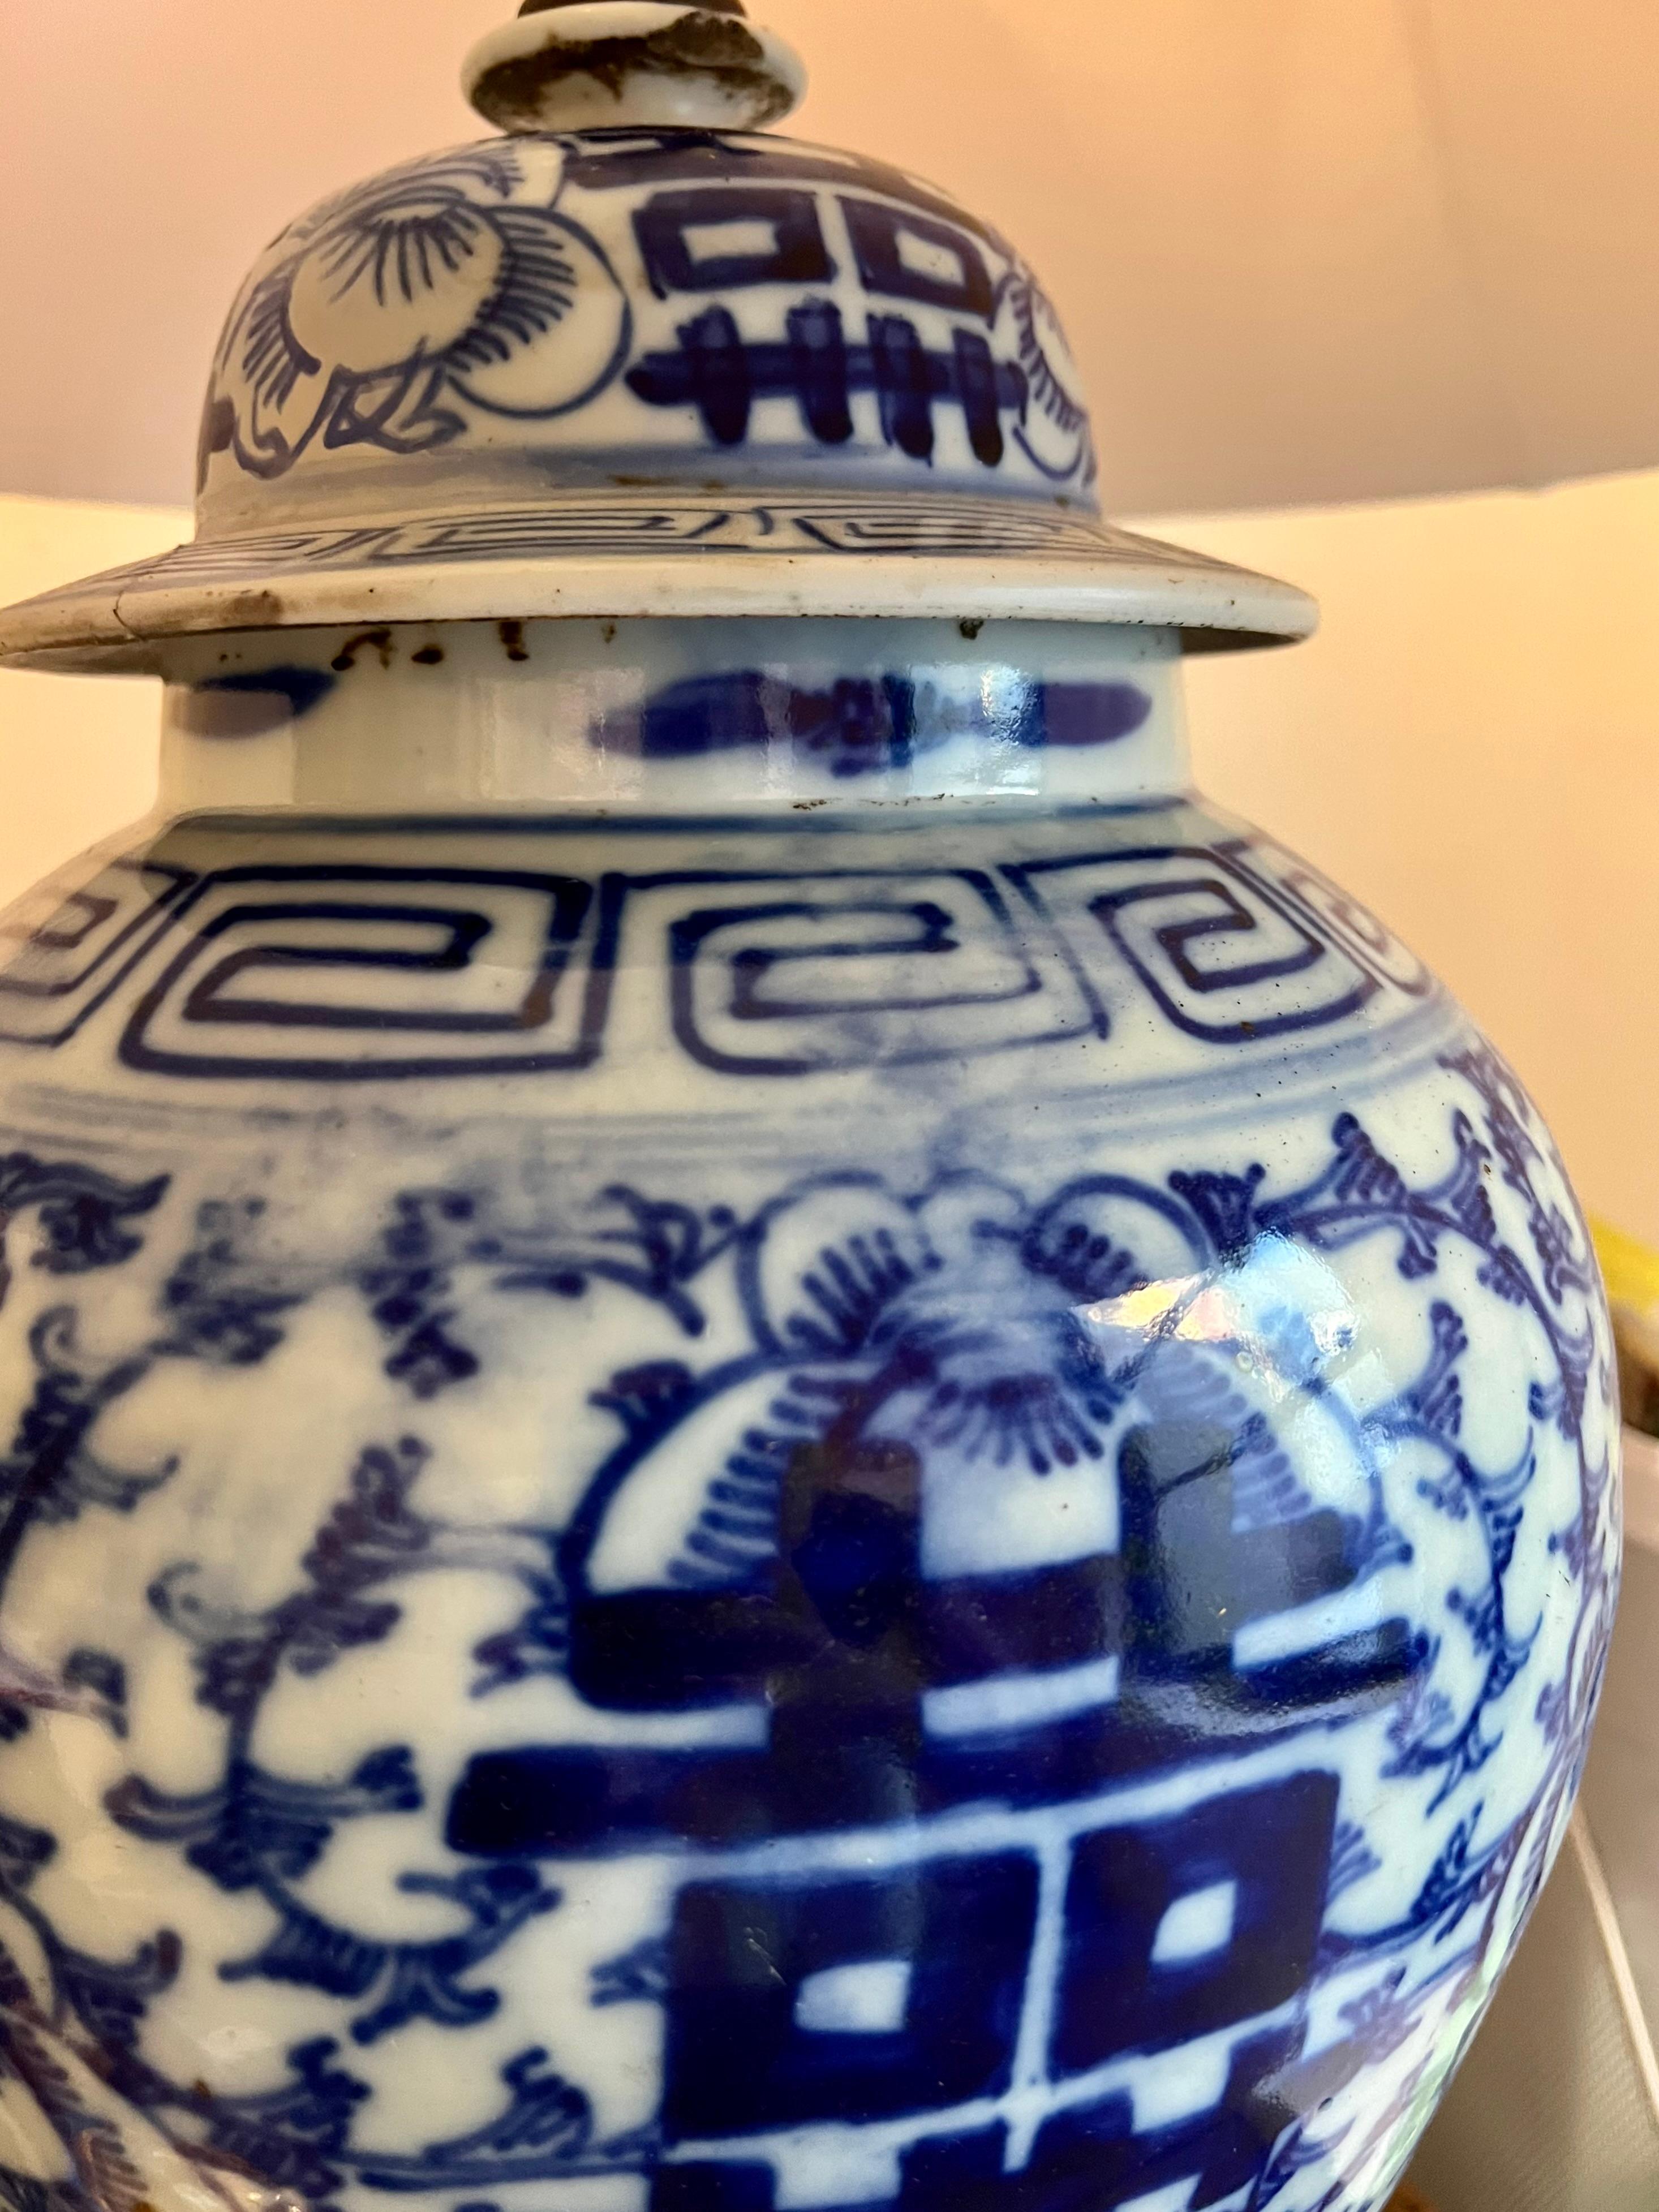 Vintage Chinese ginger jar lamp with custom raw silk shade, trimmed in antique indigo textile on top and bottom. Wood base. Originally bought from legendary Los Angeles dealer Brenda Antin in th 90’s.

Lamp dimensions: 30” H (to top of shade) x